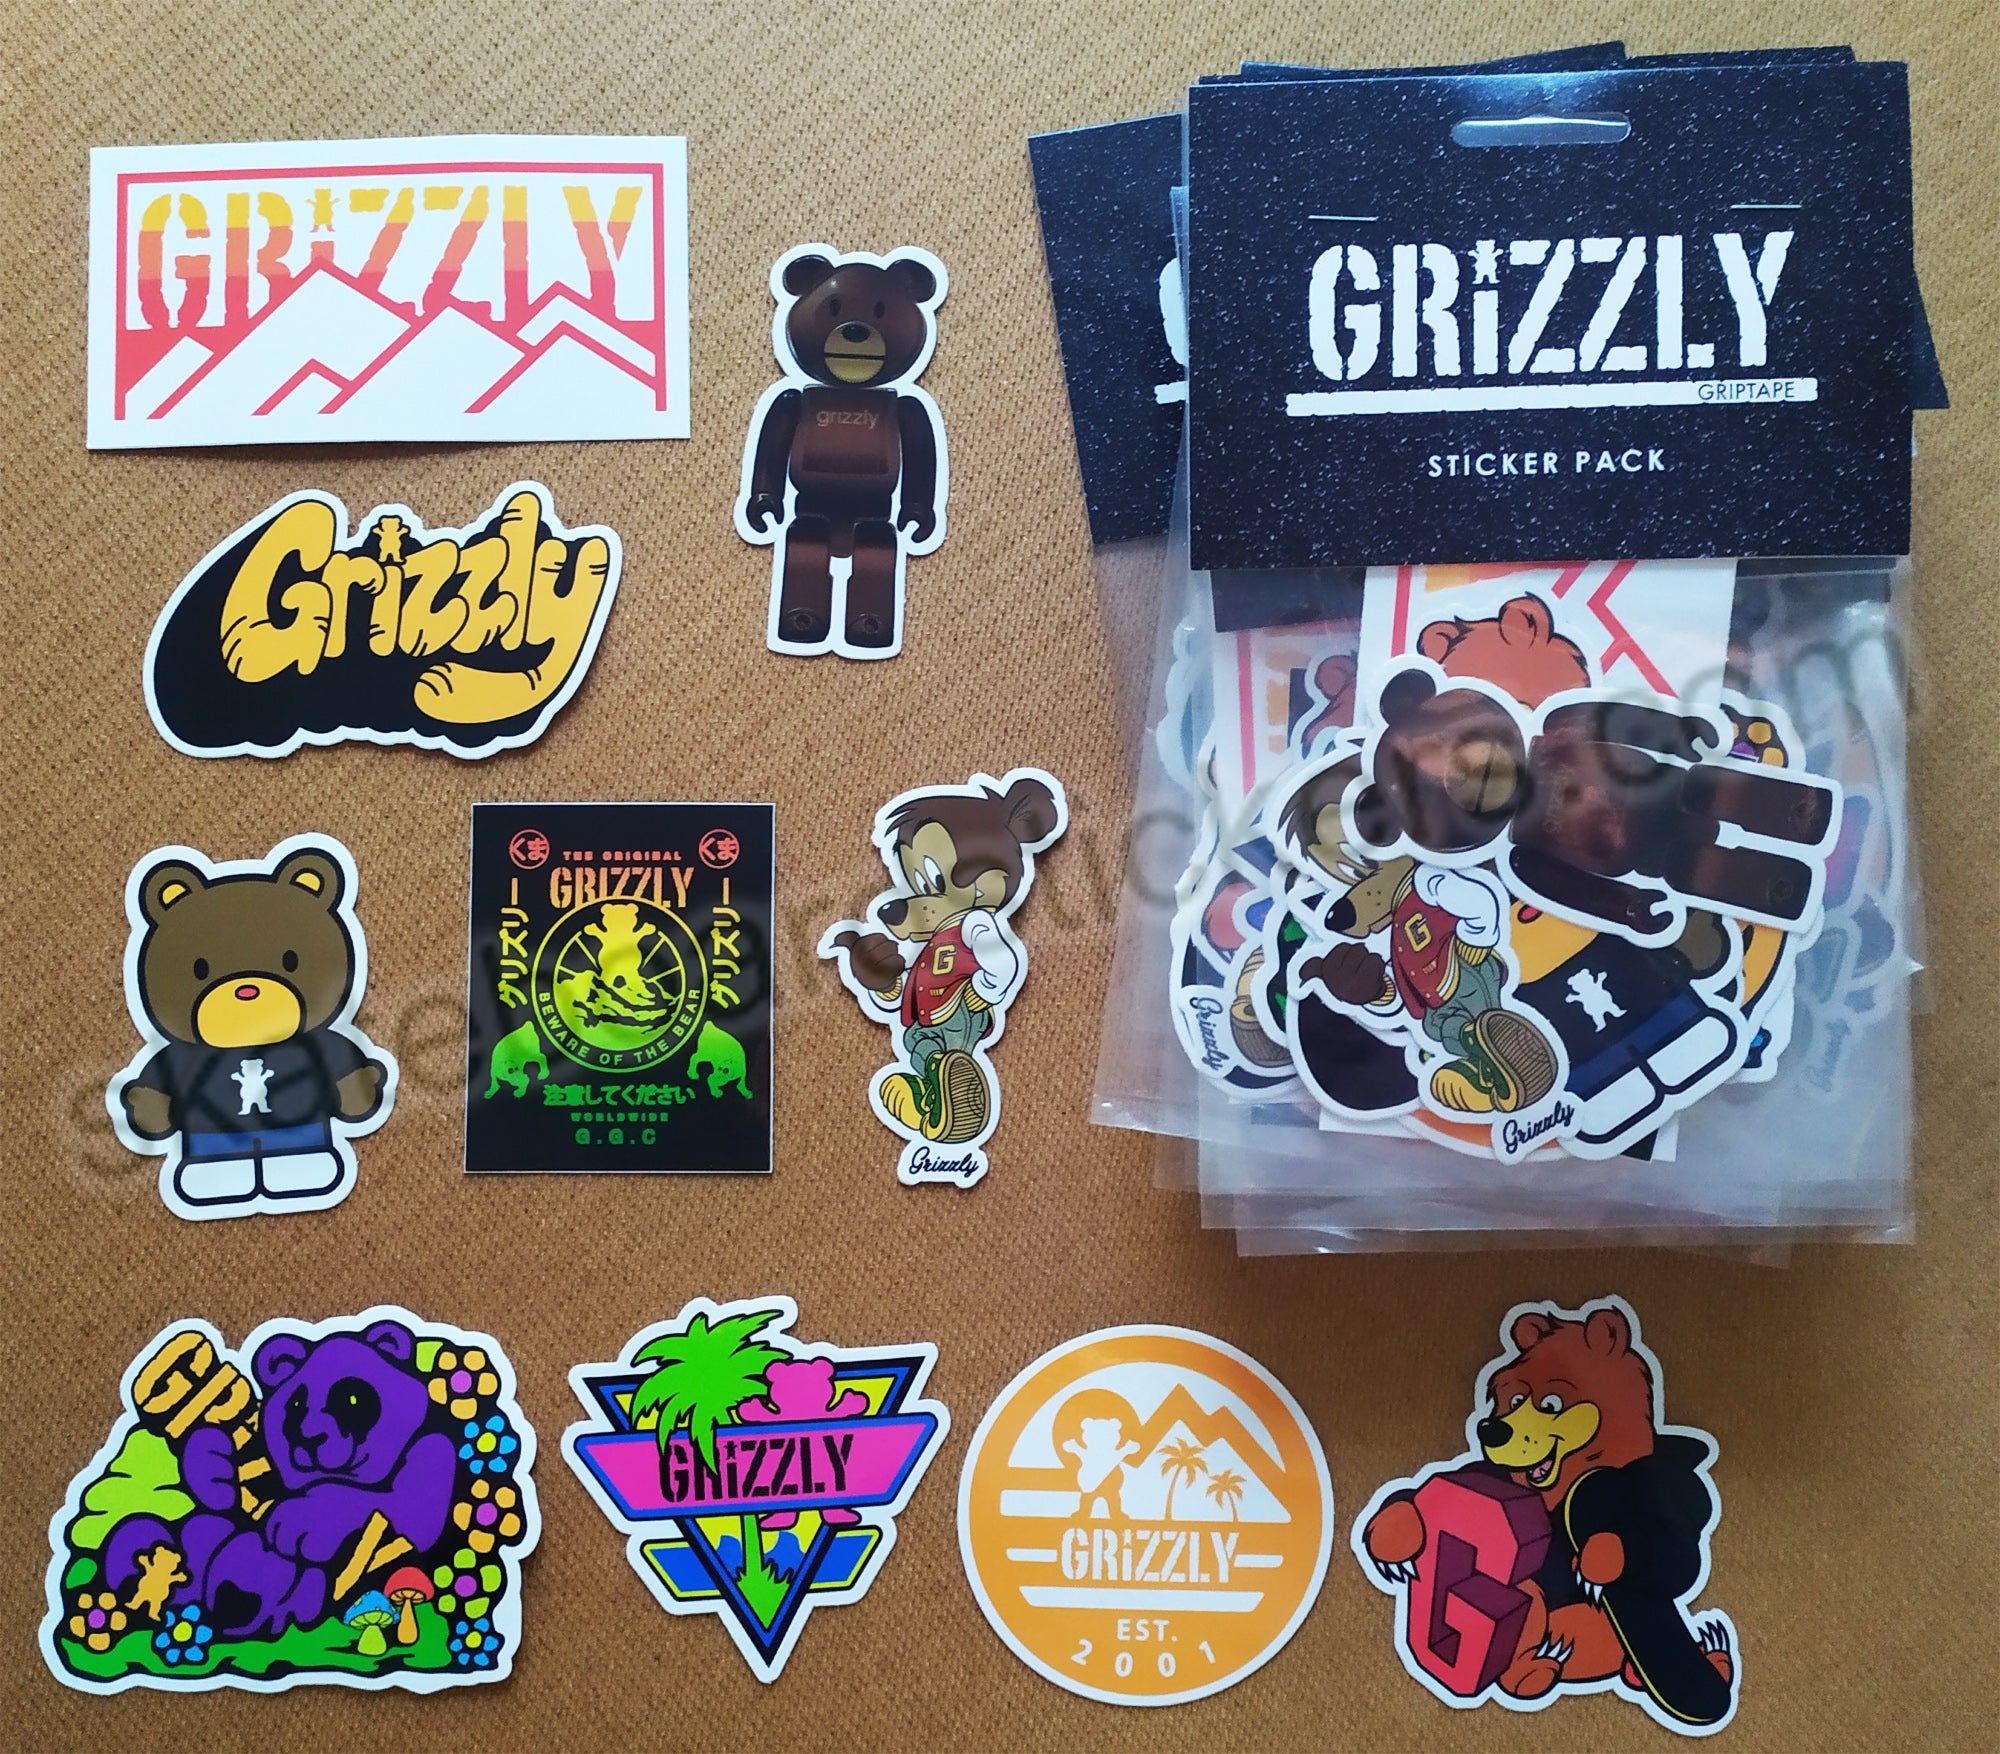 Grizzly Griptape Skate Sticker Pack - 10 stickers